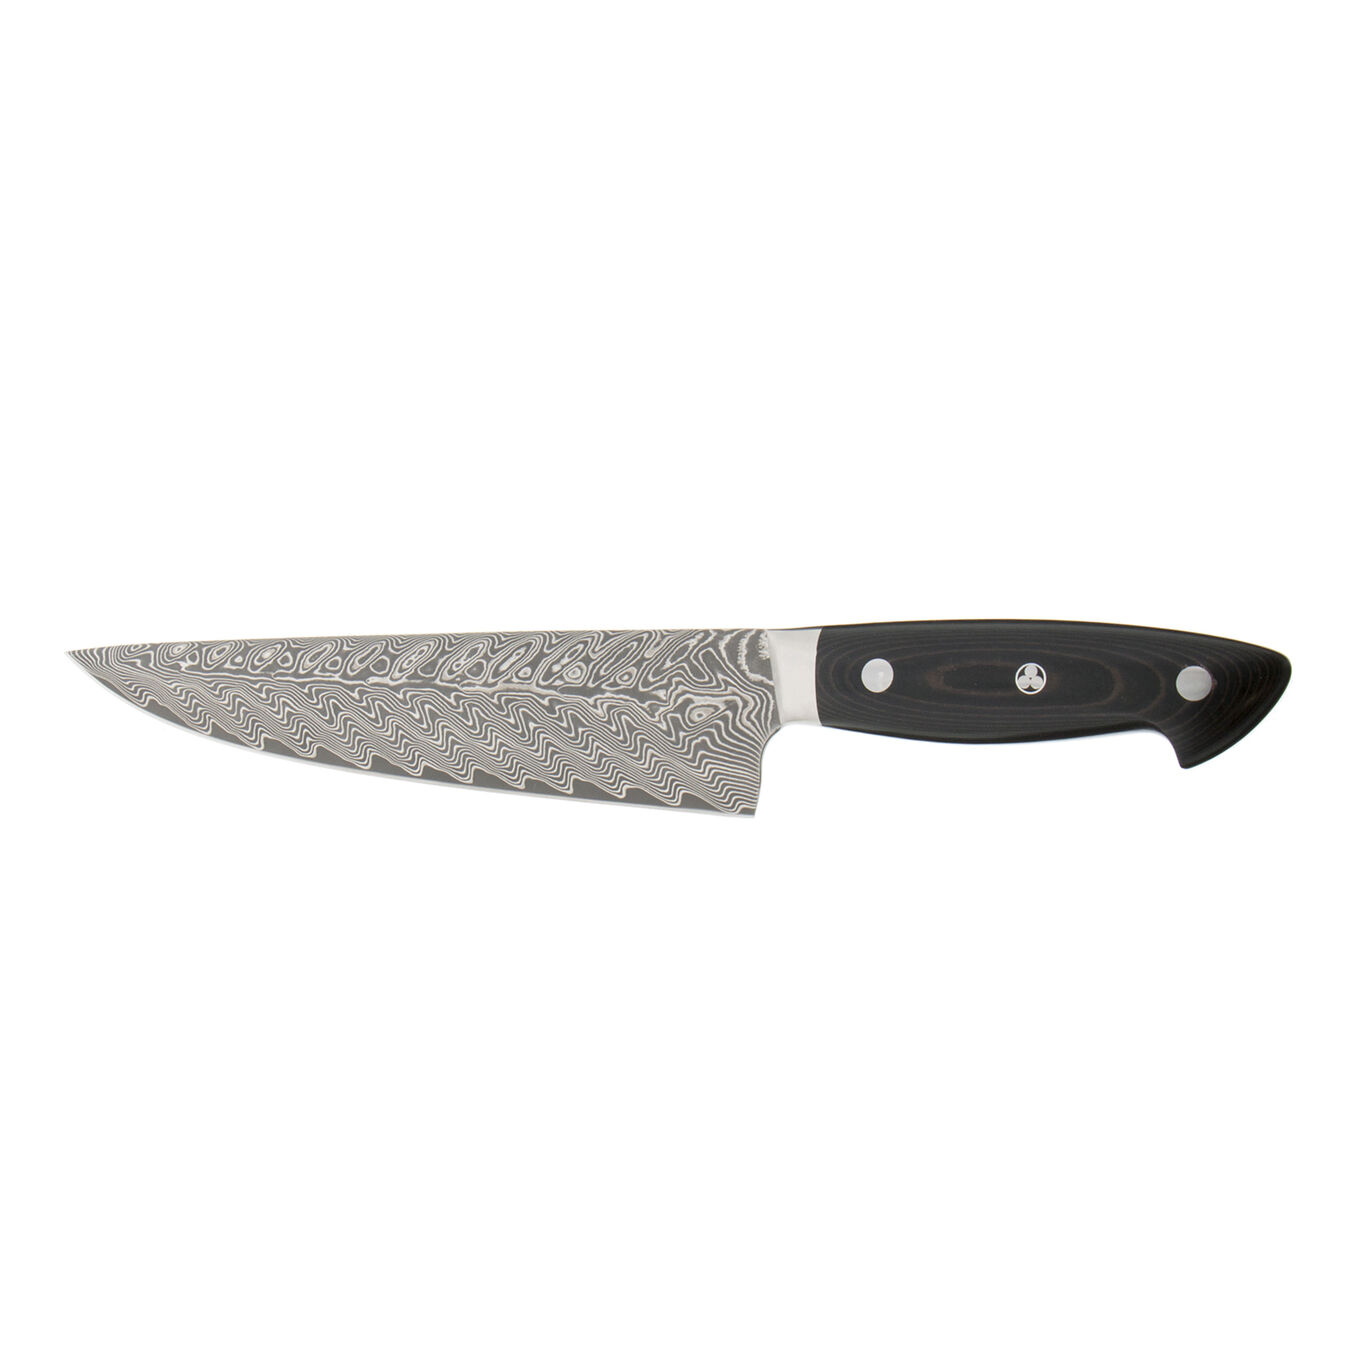 8-inch, Narrow Chef's Knife,,large 1